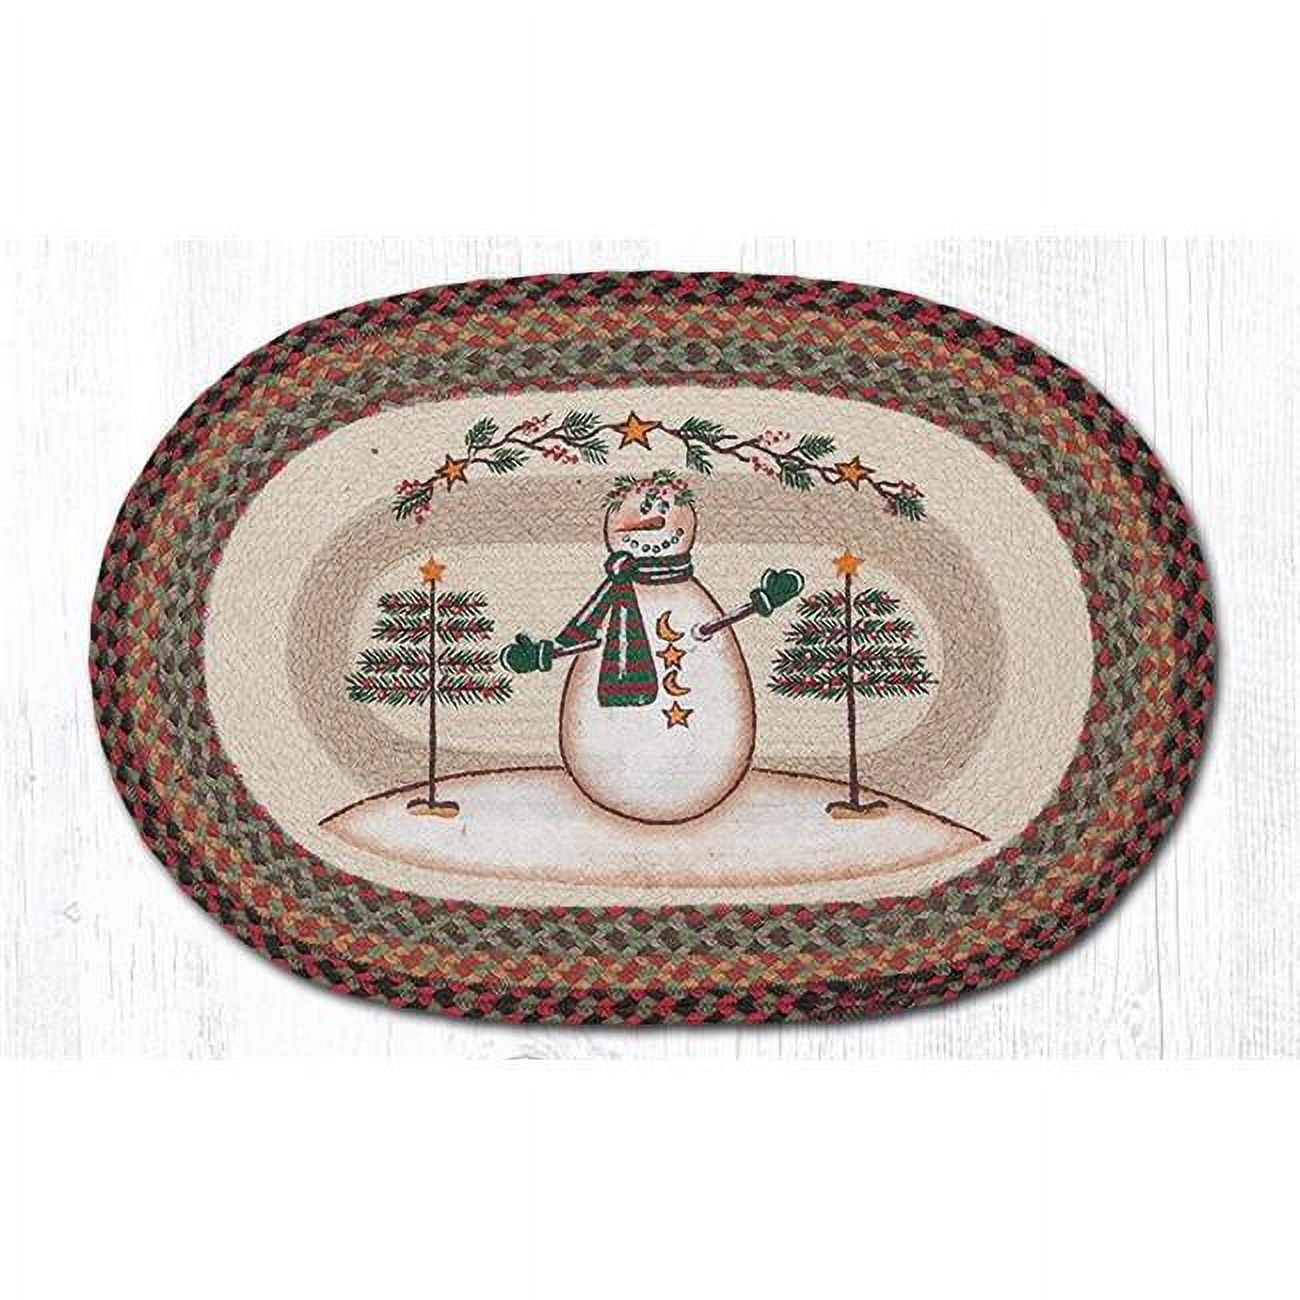 20 X 30 In. Moon & Star Snowman Oval Patch Rug